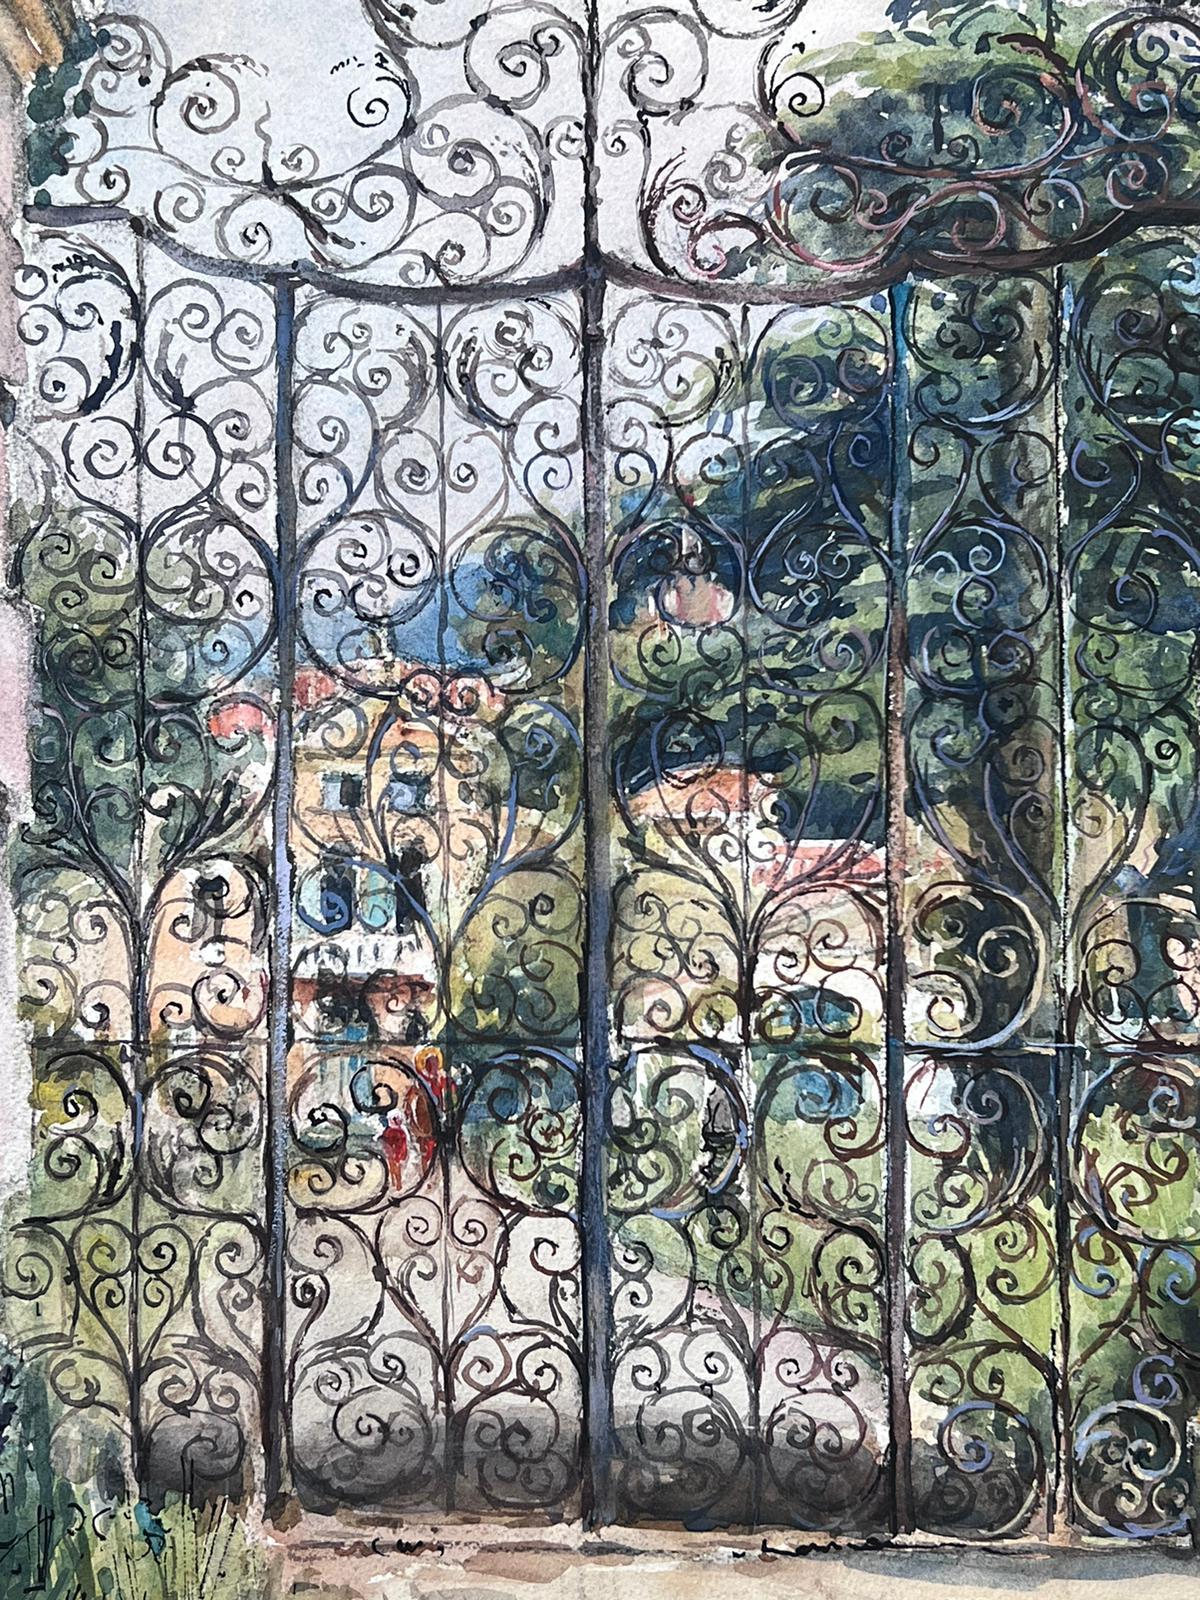 The Chateau Gates
Jean La Forgue (French 1901-1975) watercolour on paper, unframed
painting: 25.5 x 19.5 inches
provenance: the artists estate, France
condition: very good and sound condition; there are minor age related marks and stains to the